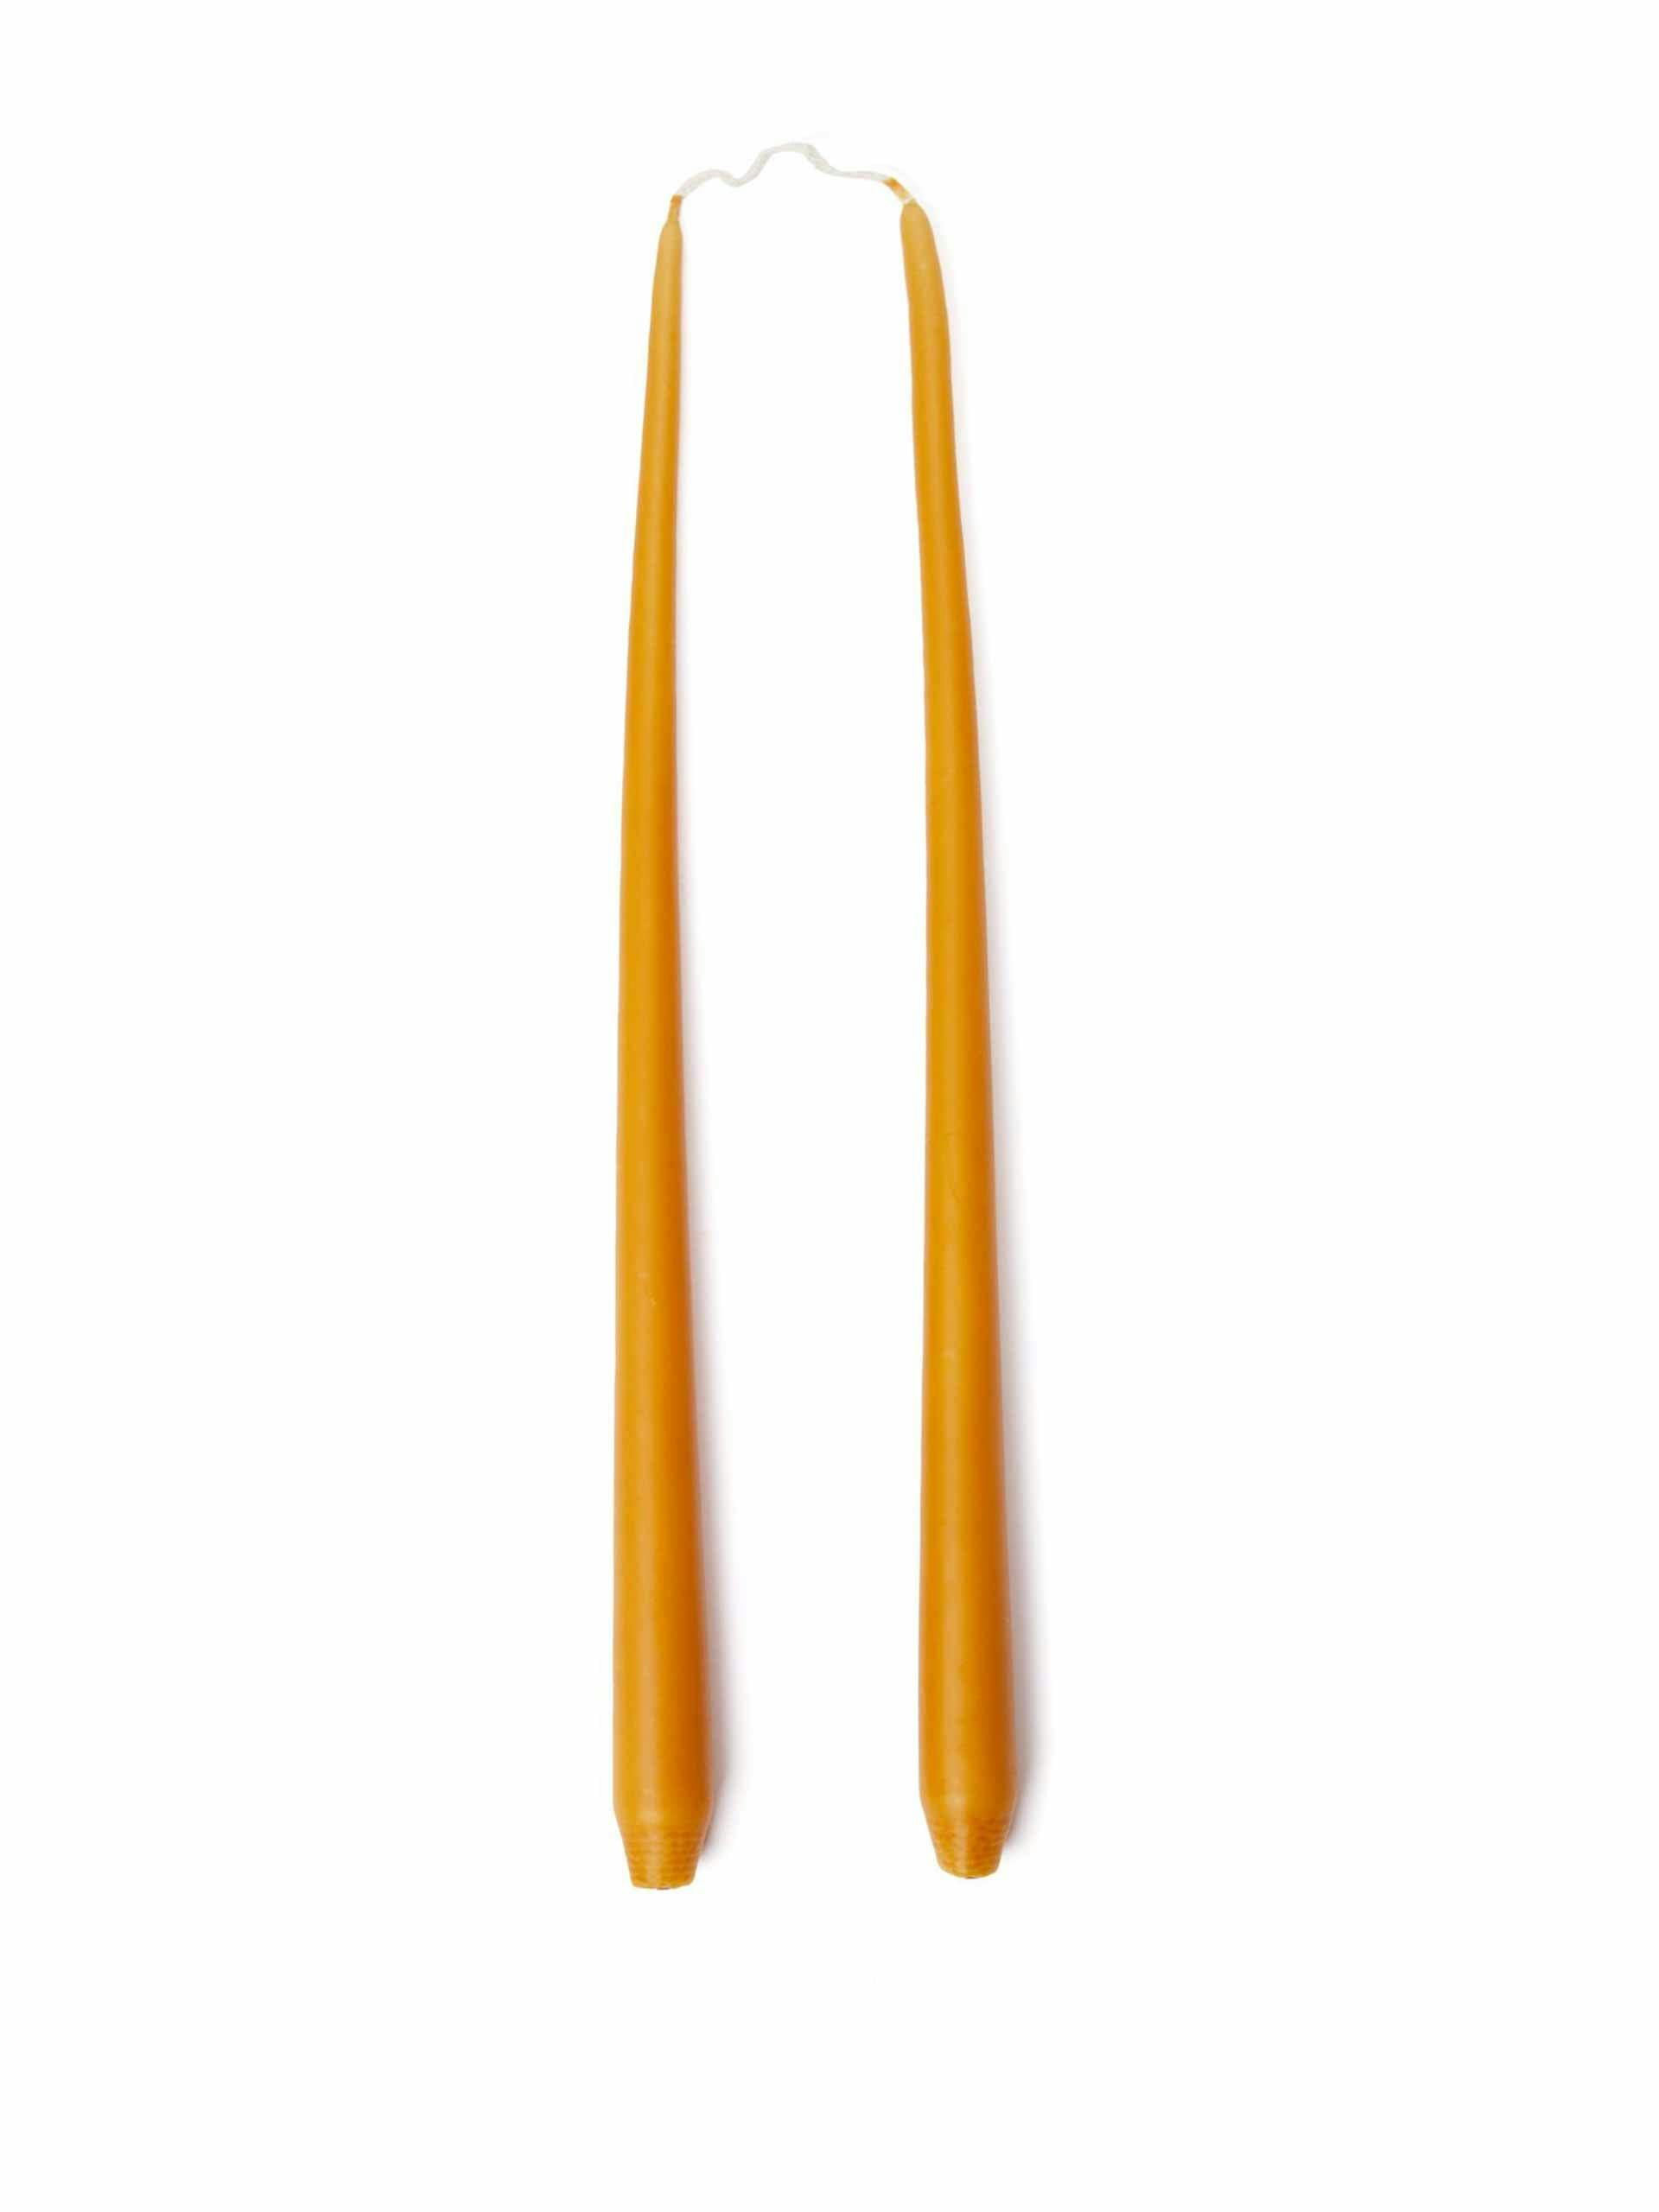 Tapered candles (set of two)